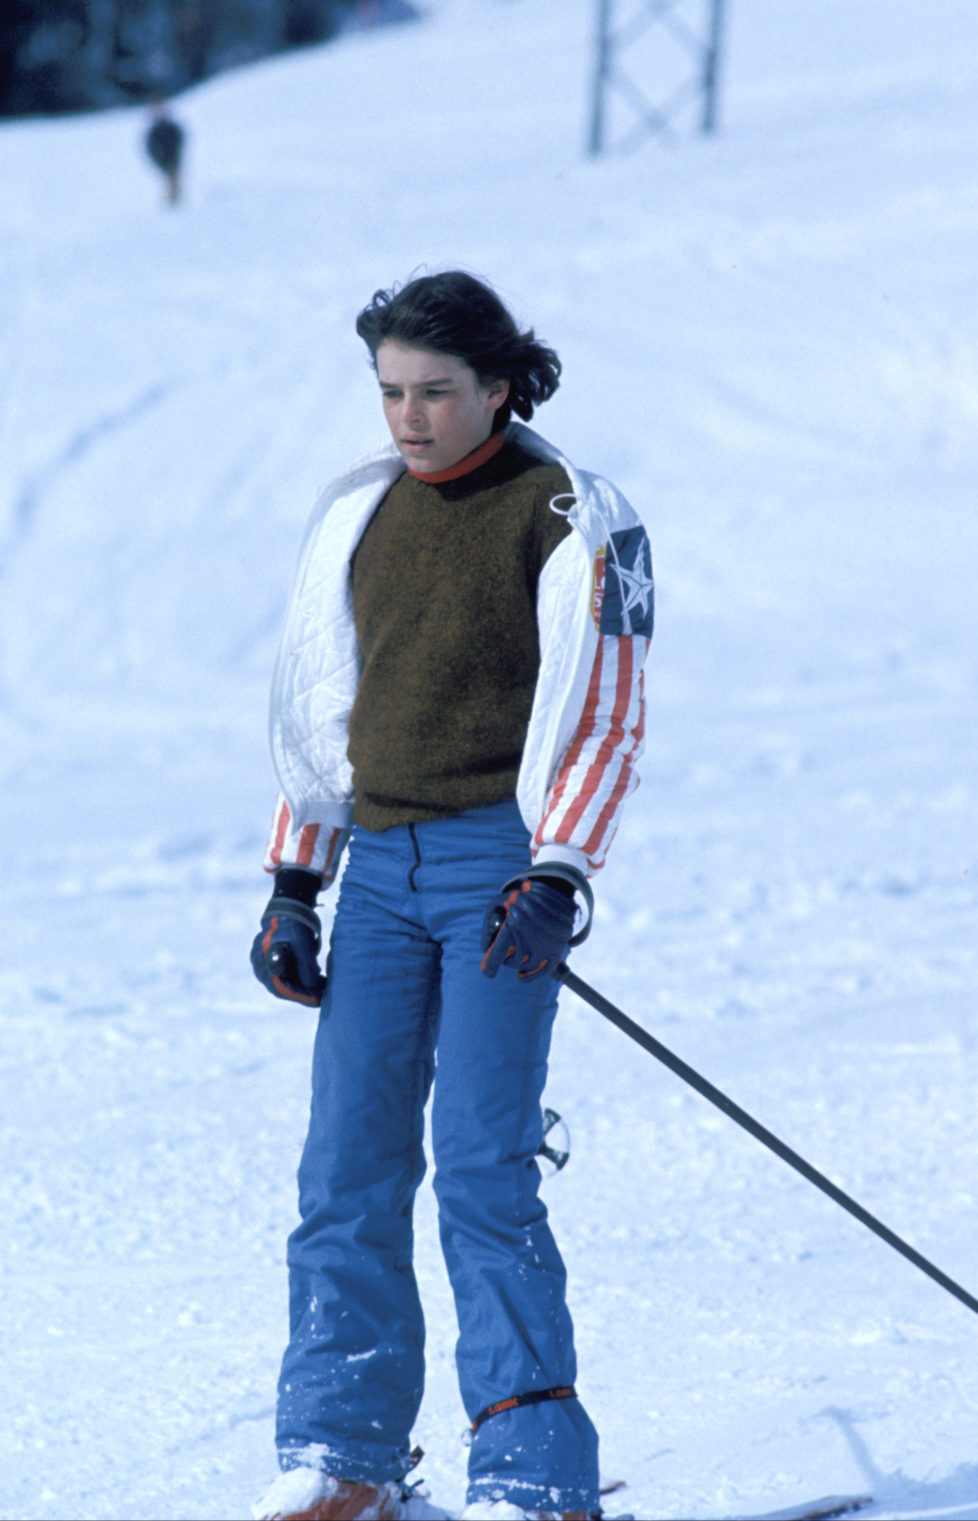 Gstaad, Switzerland -- 1 March 1977, Princess Stephanie of Monaco skiing at Gstaad., (Photo by Francis Apesteguy/Getty Images) *** Local Caption ***